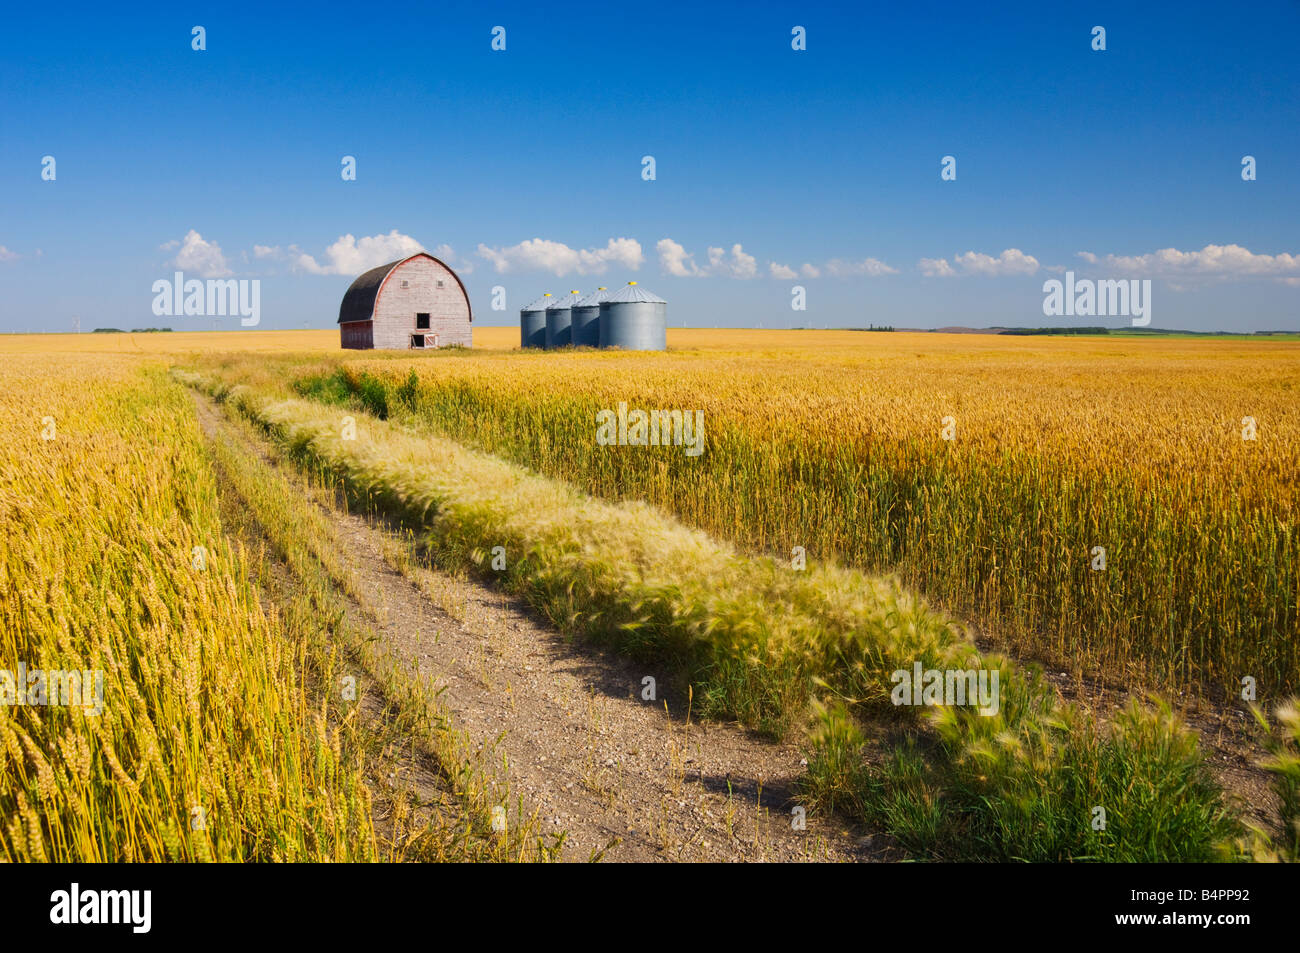 A ripe wheat field with an old barn and grain storage bins near Bruxelles,Manitoba Canada Stock Photo